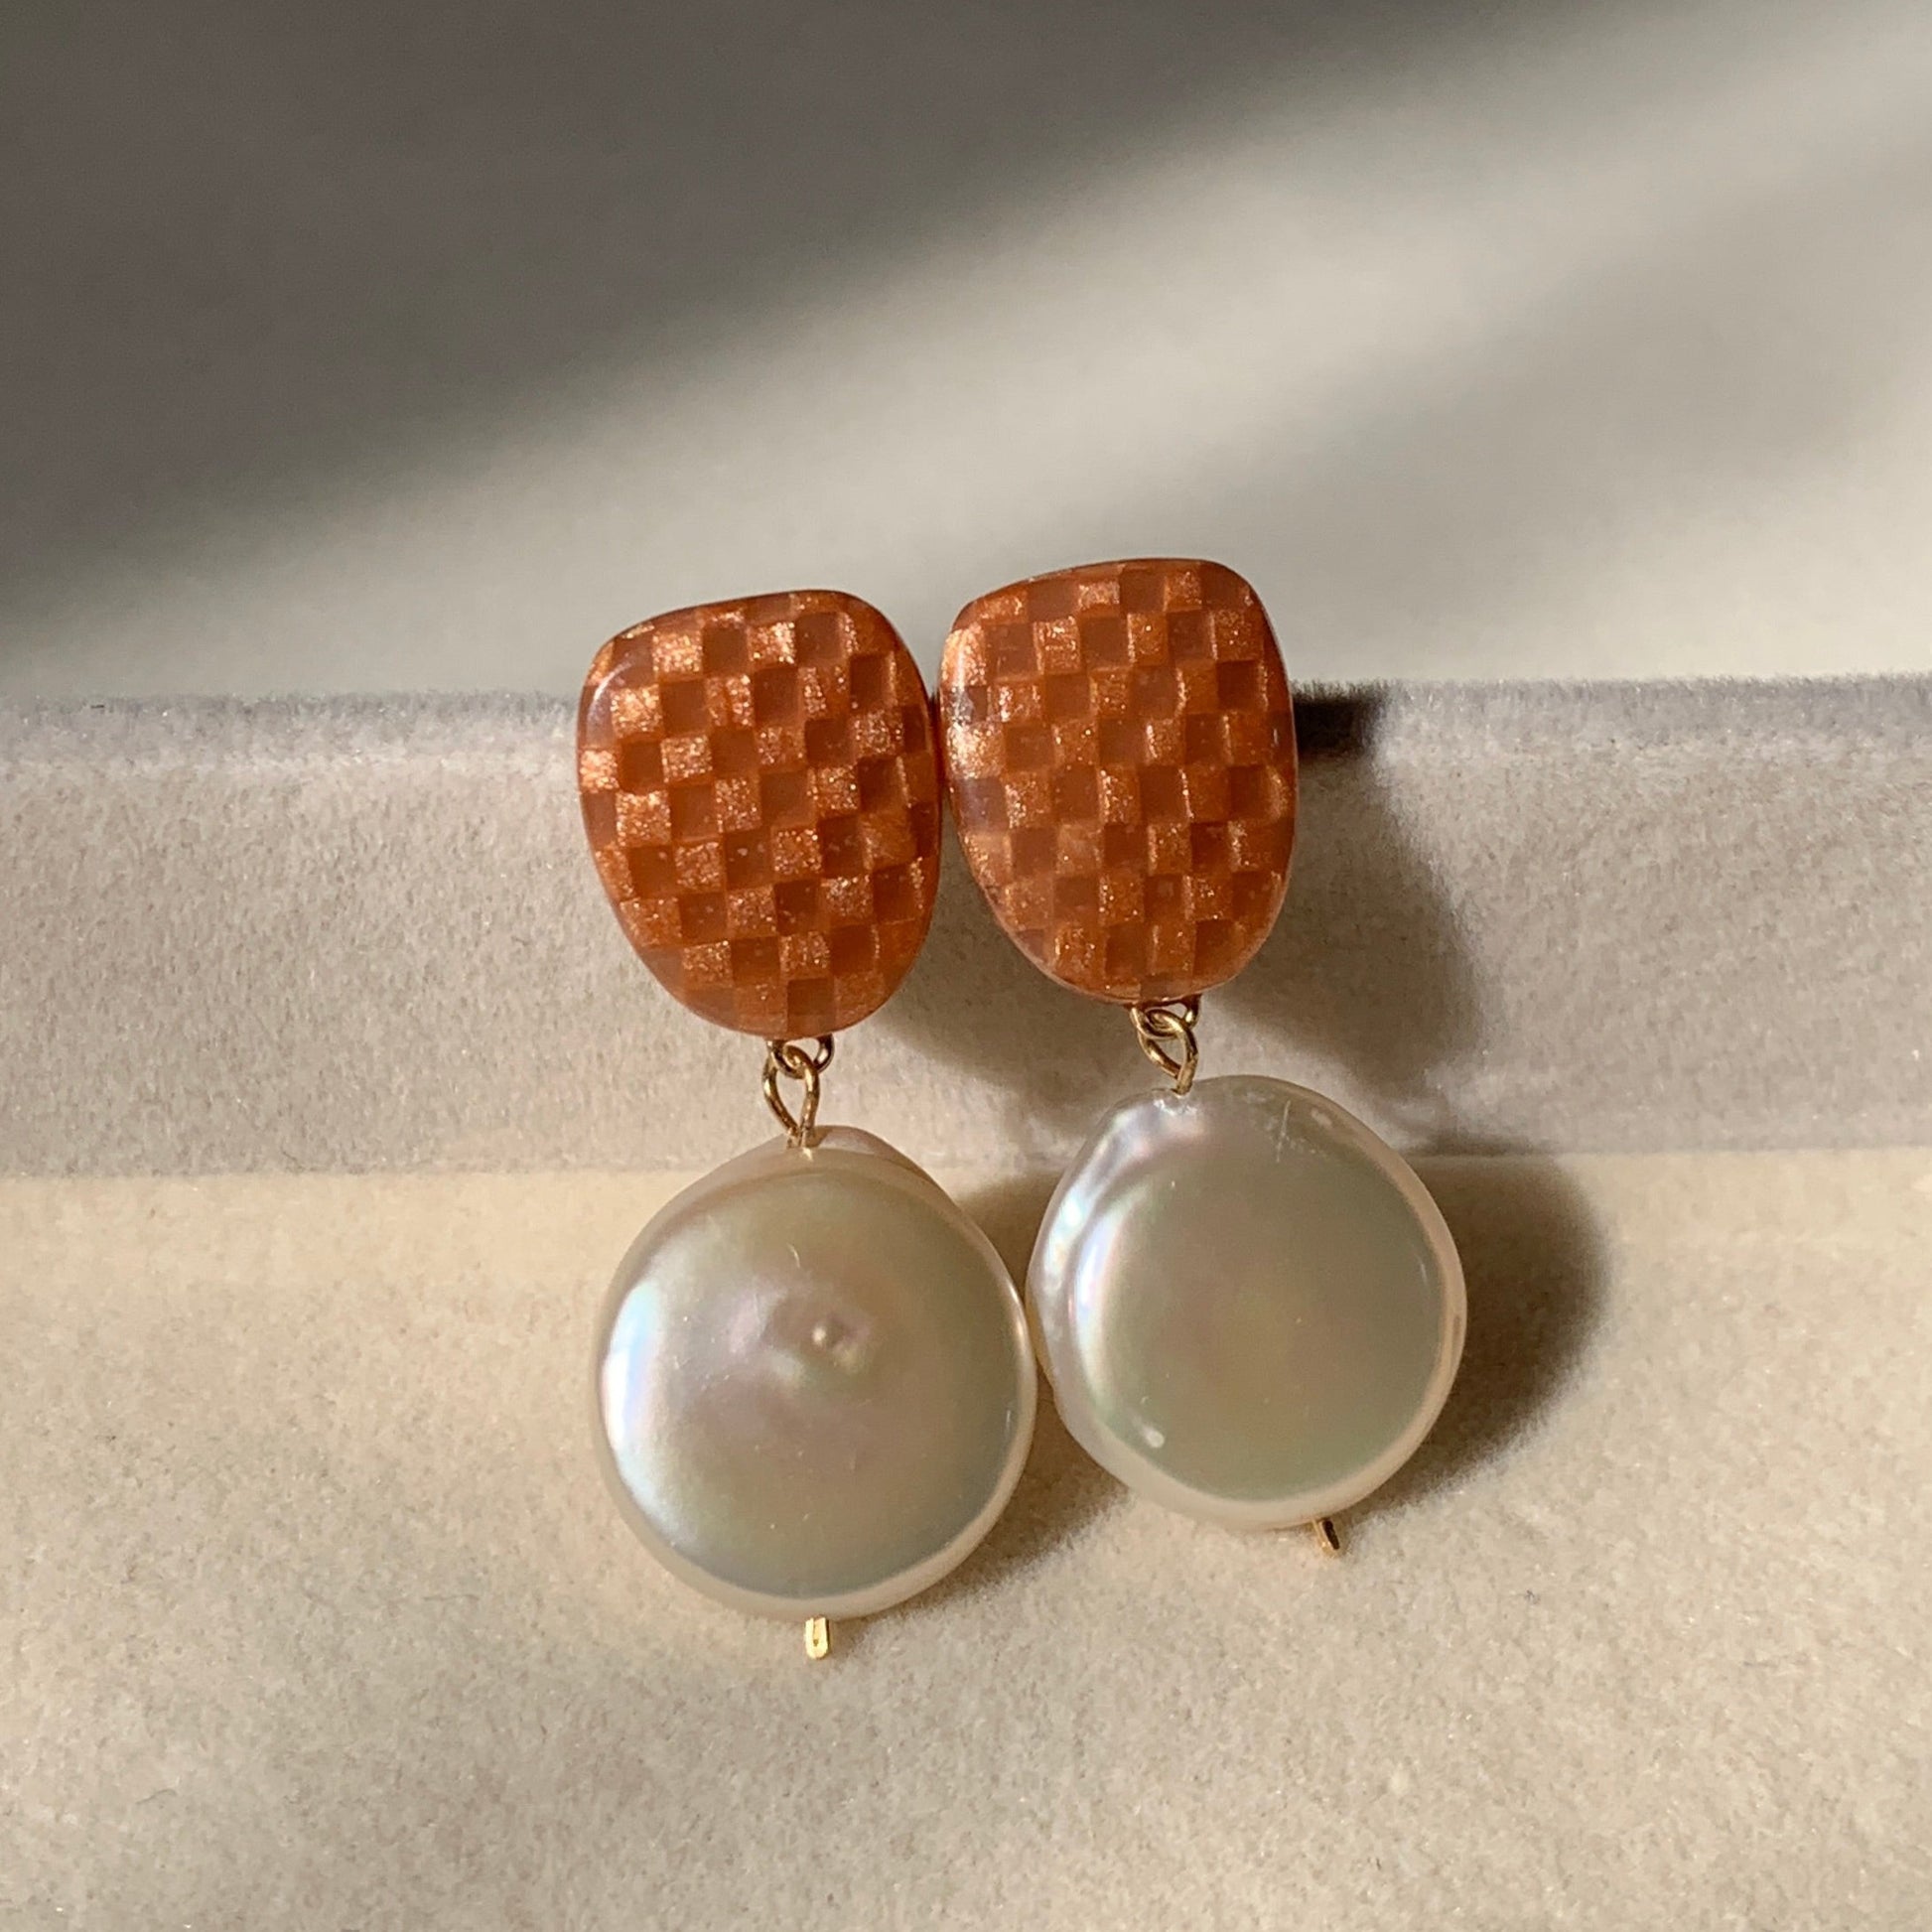 copper handmade polymer clay earrings with white baroque pearls, using 14k gold-filled wire and 925 sterling silver post